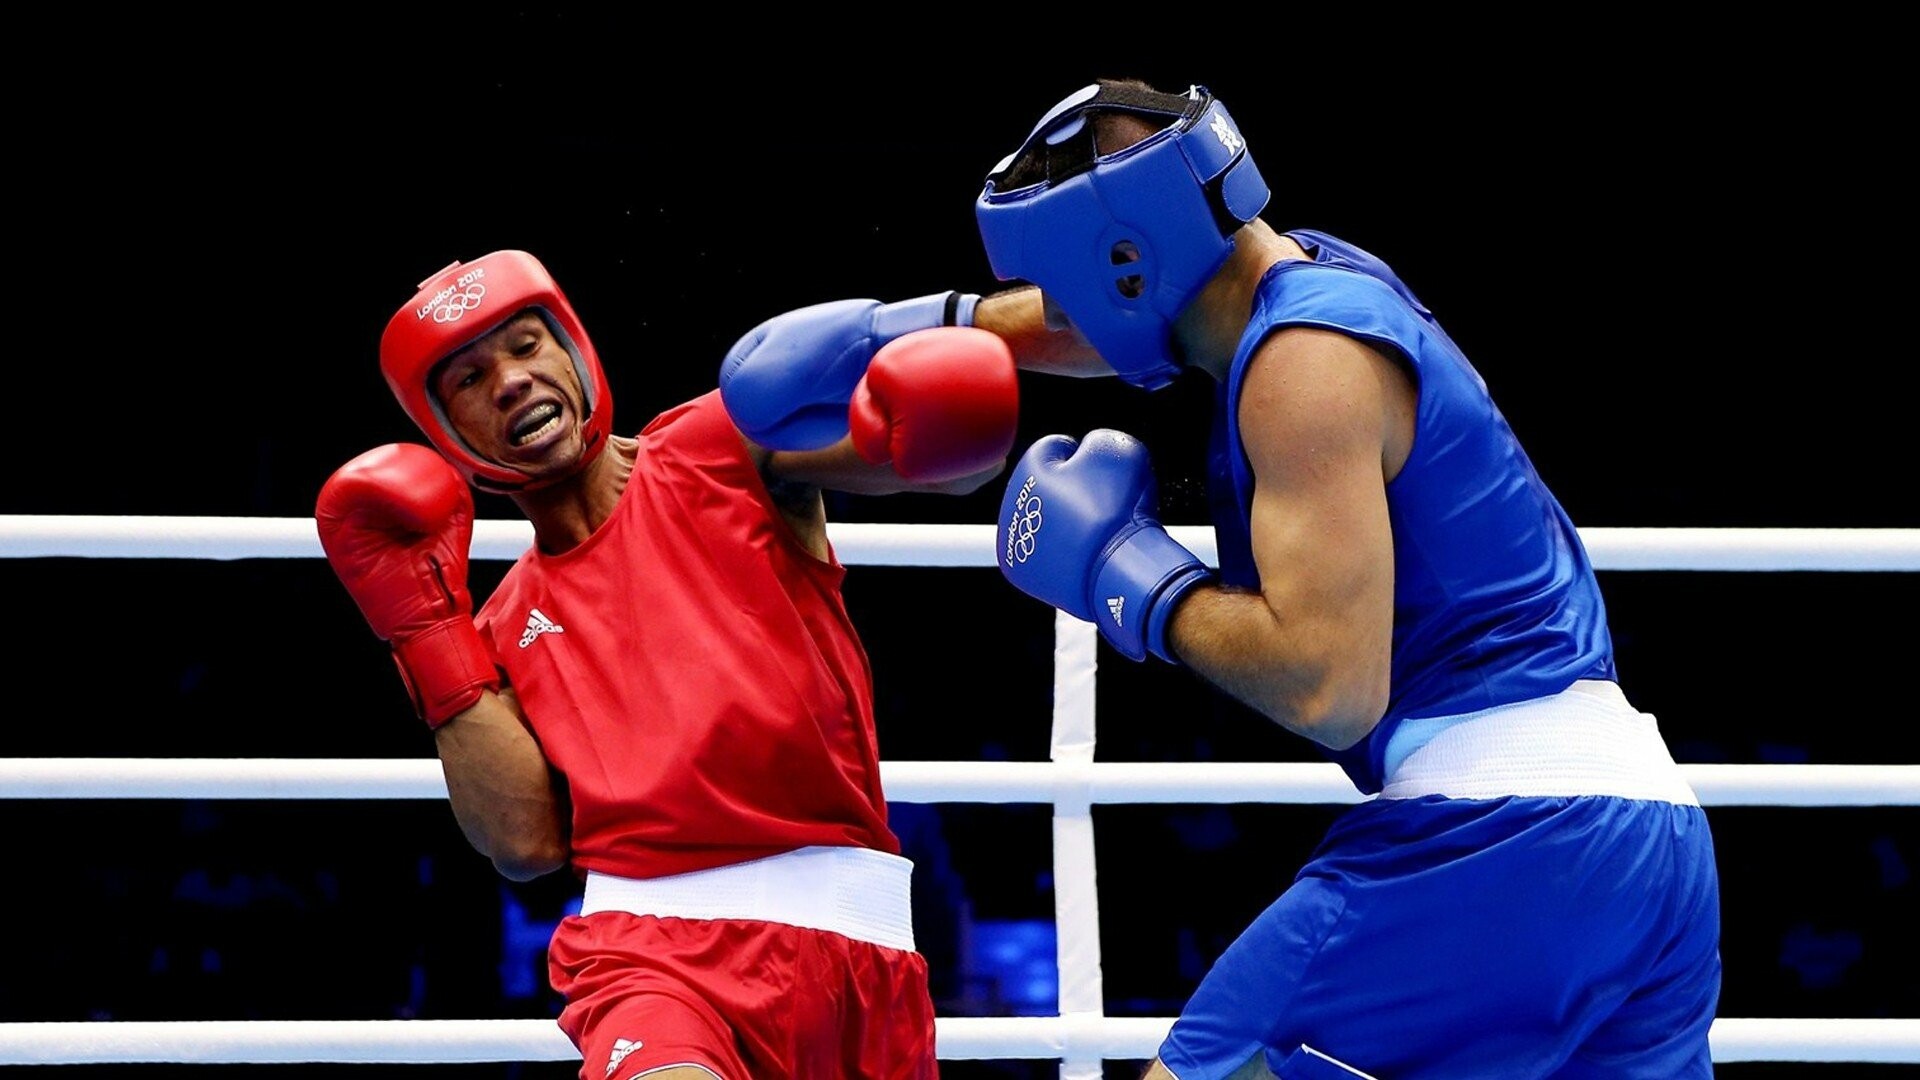 Boxing: London 2012 Summer Olympics, Has been included among the Olympic Games since 1904. 1920x1080 Full HD Wallpaper.